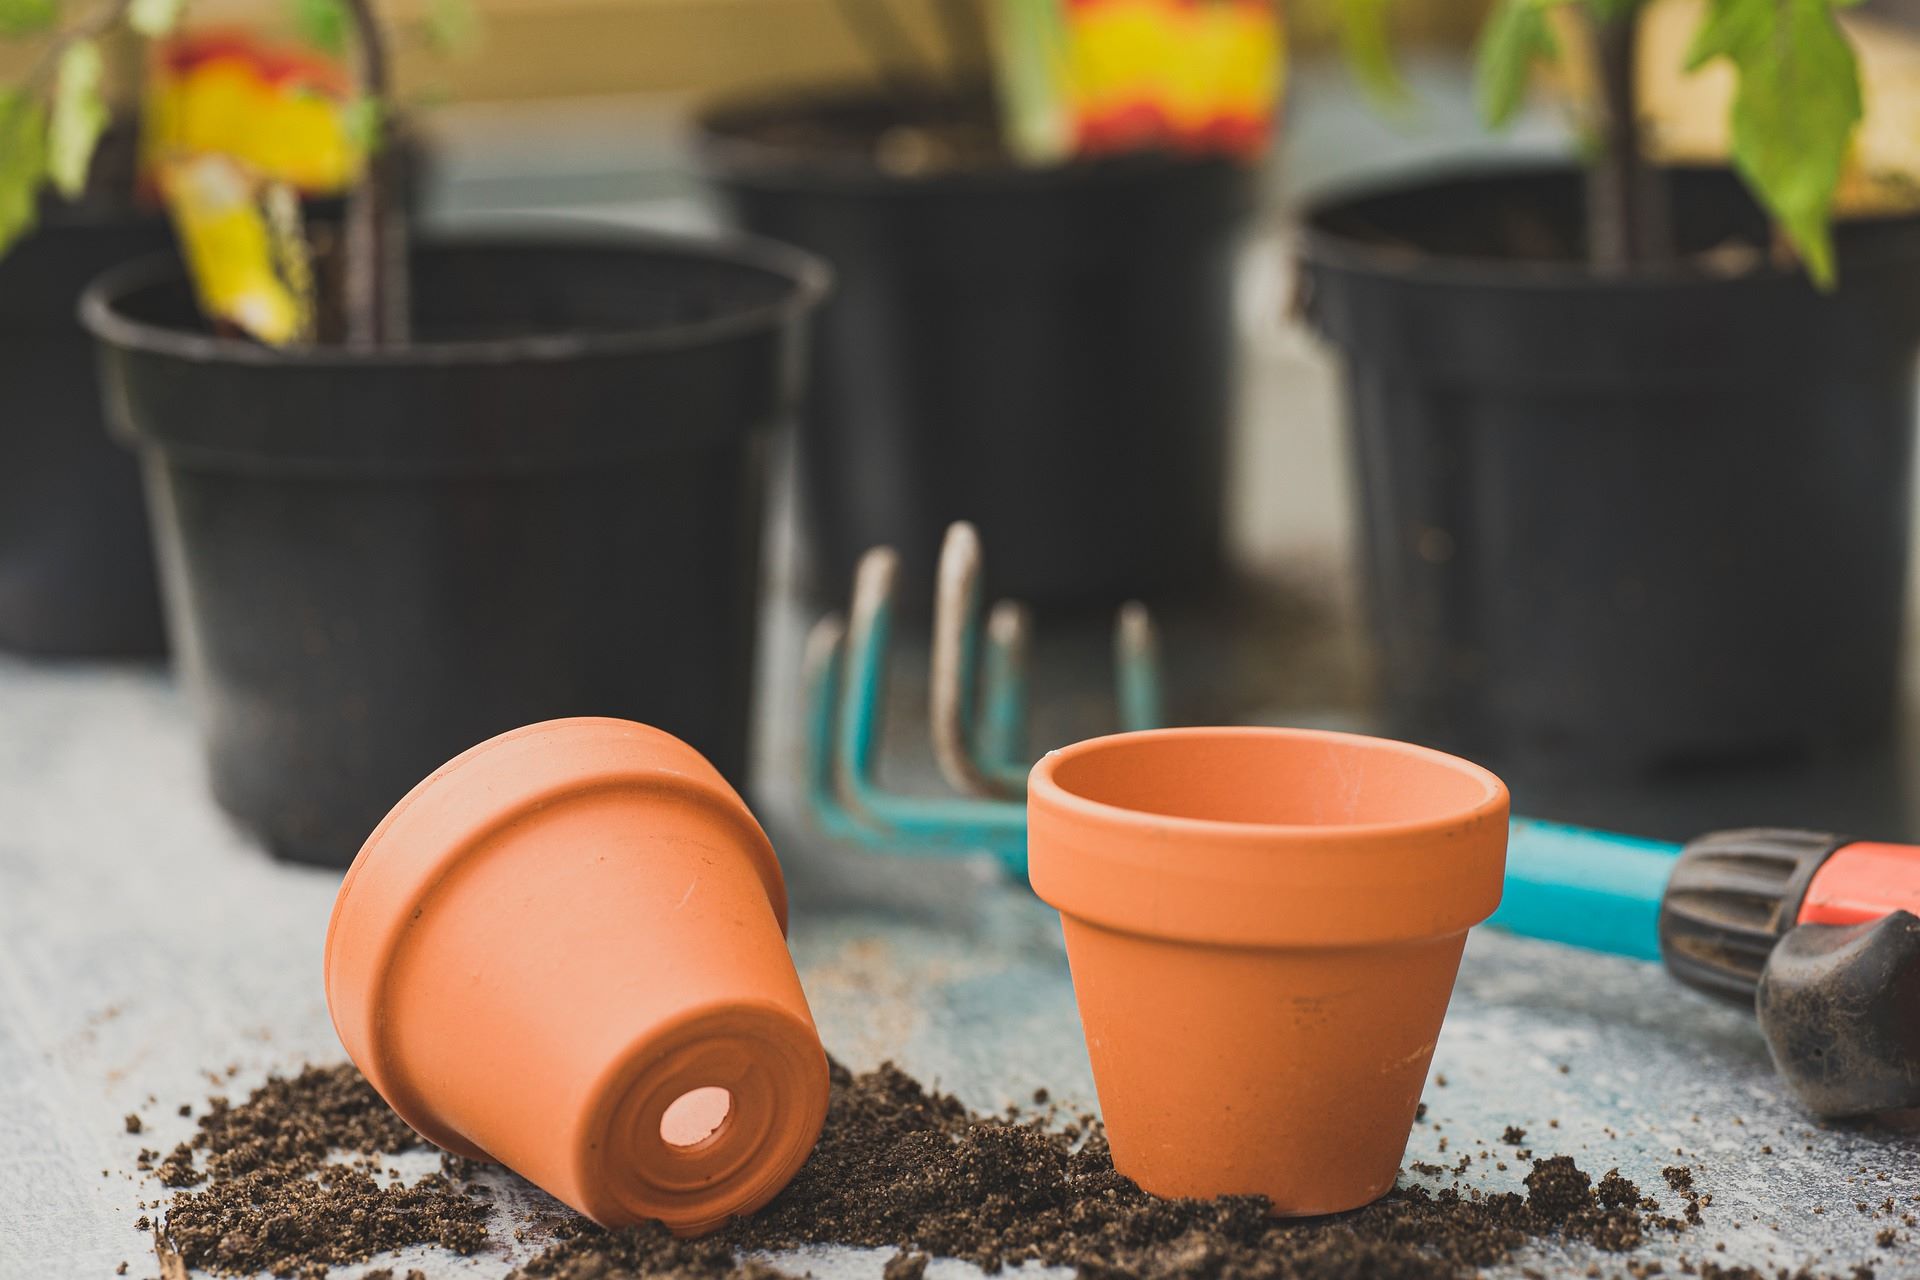 How To Put Drainage Holes In Plastic Plant Pots